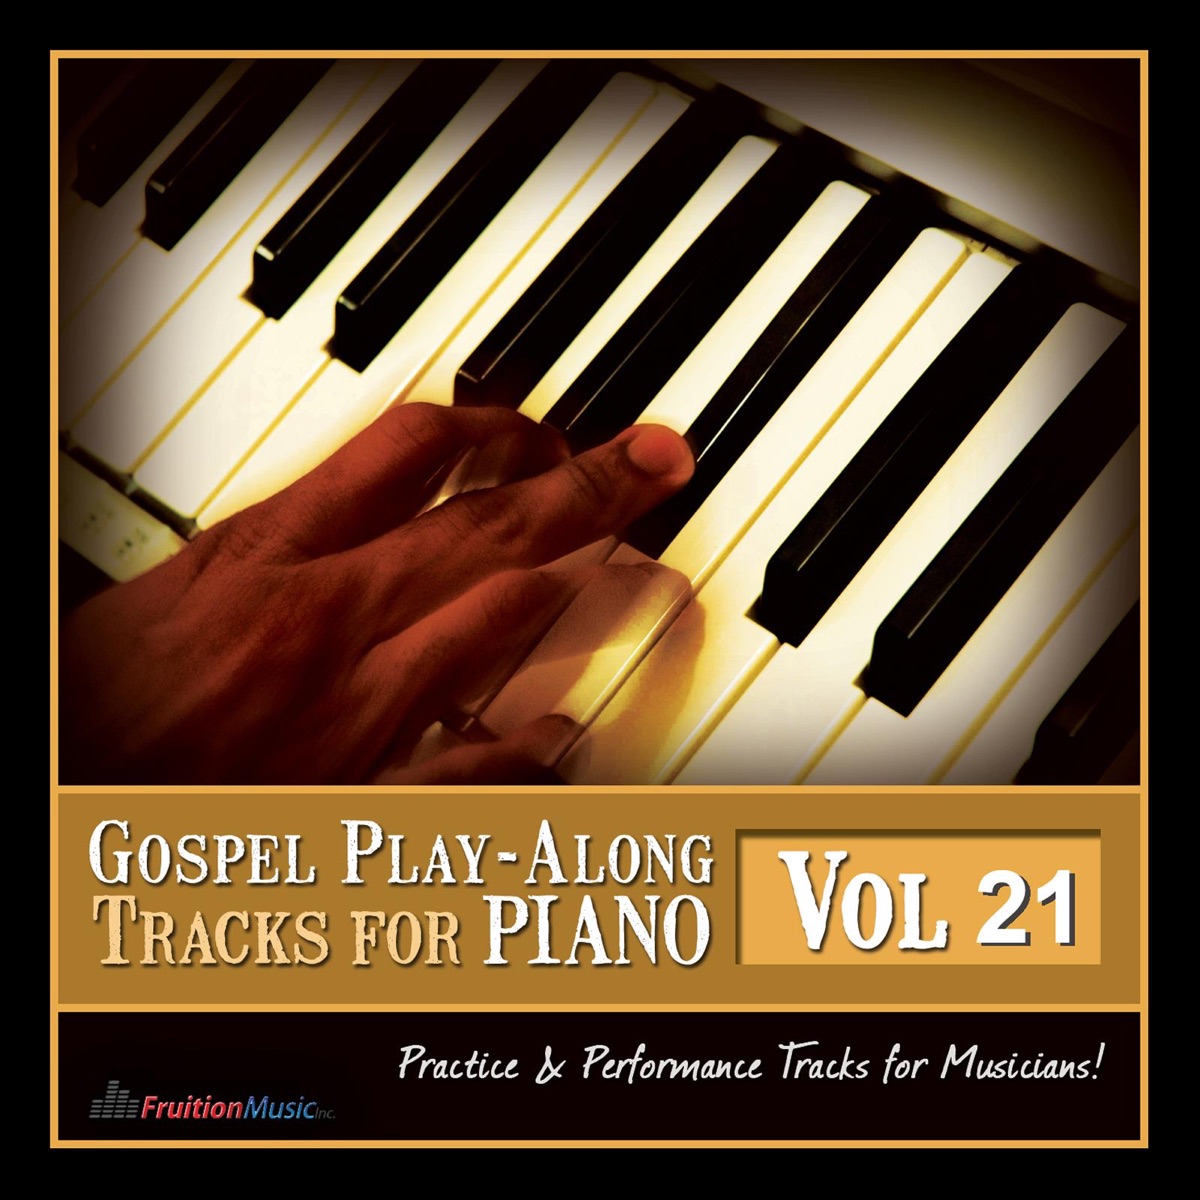 Gospel Play Along Tracks for Piano, Vol. 20 - Album by Fruition Music Inc.  - Apple Music